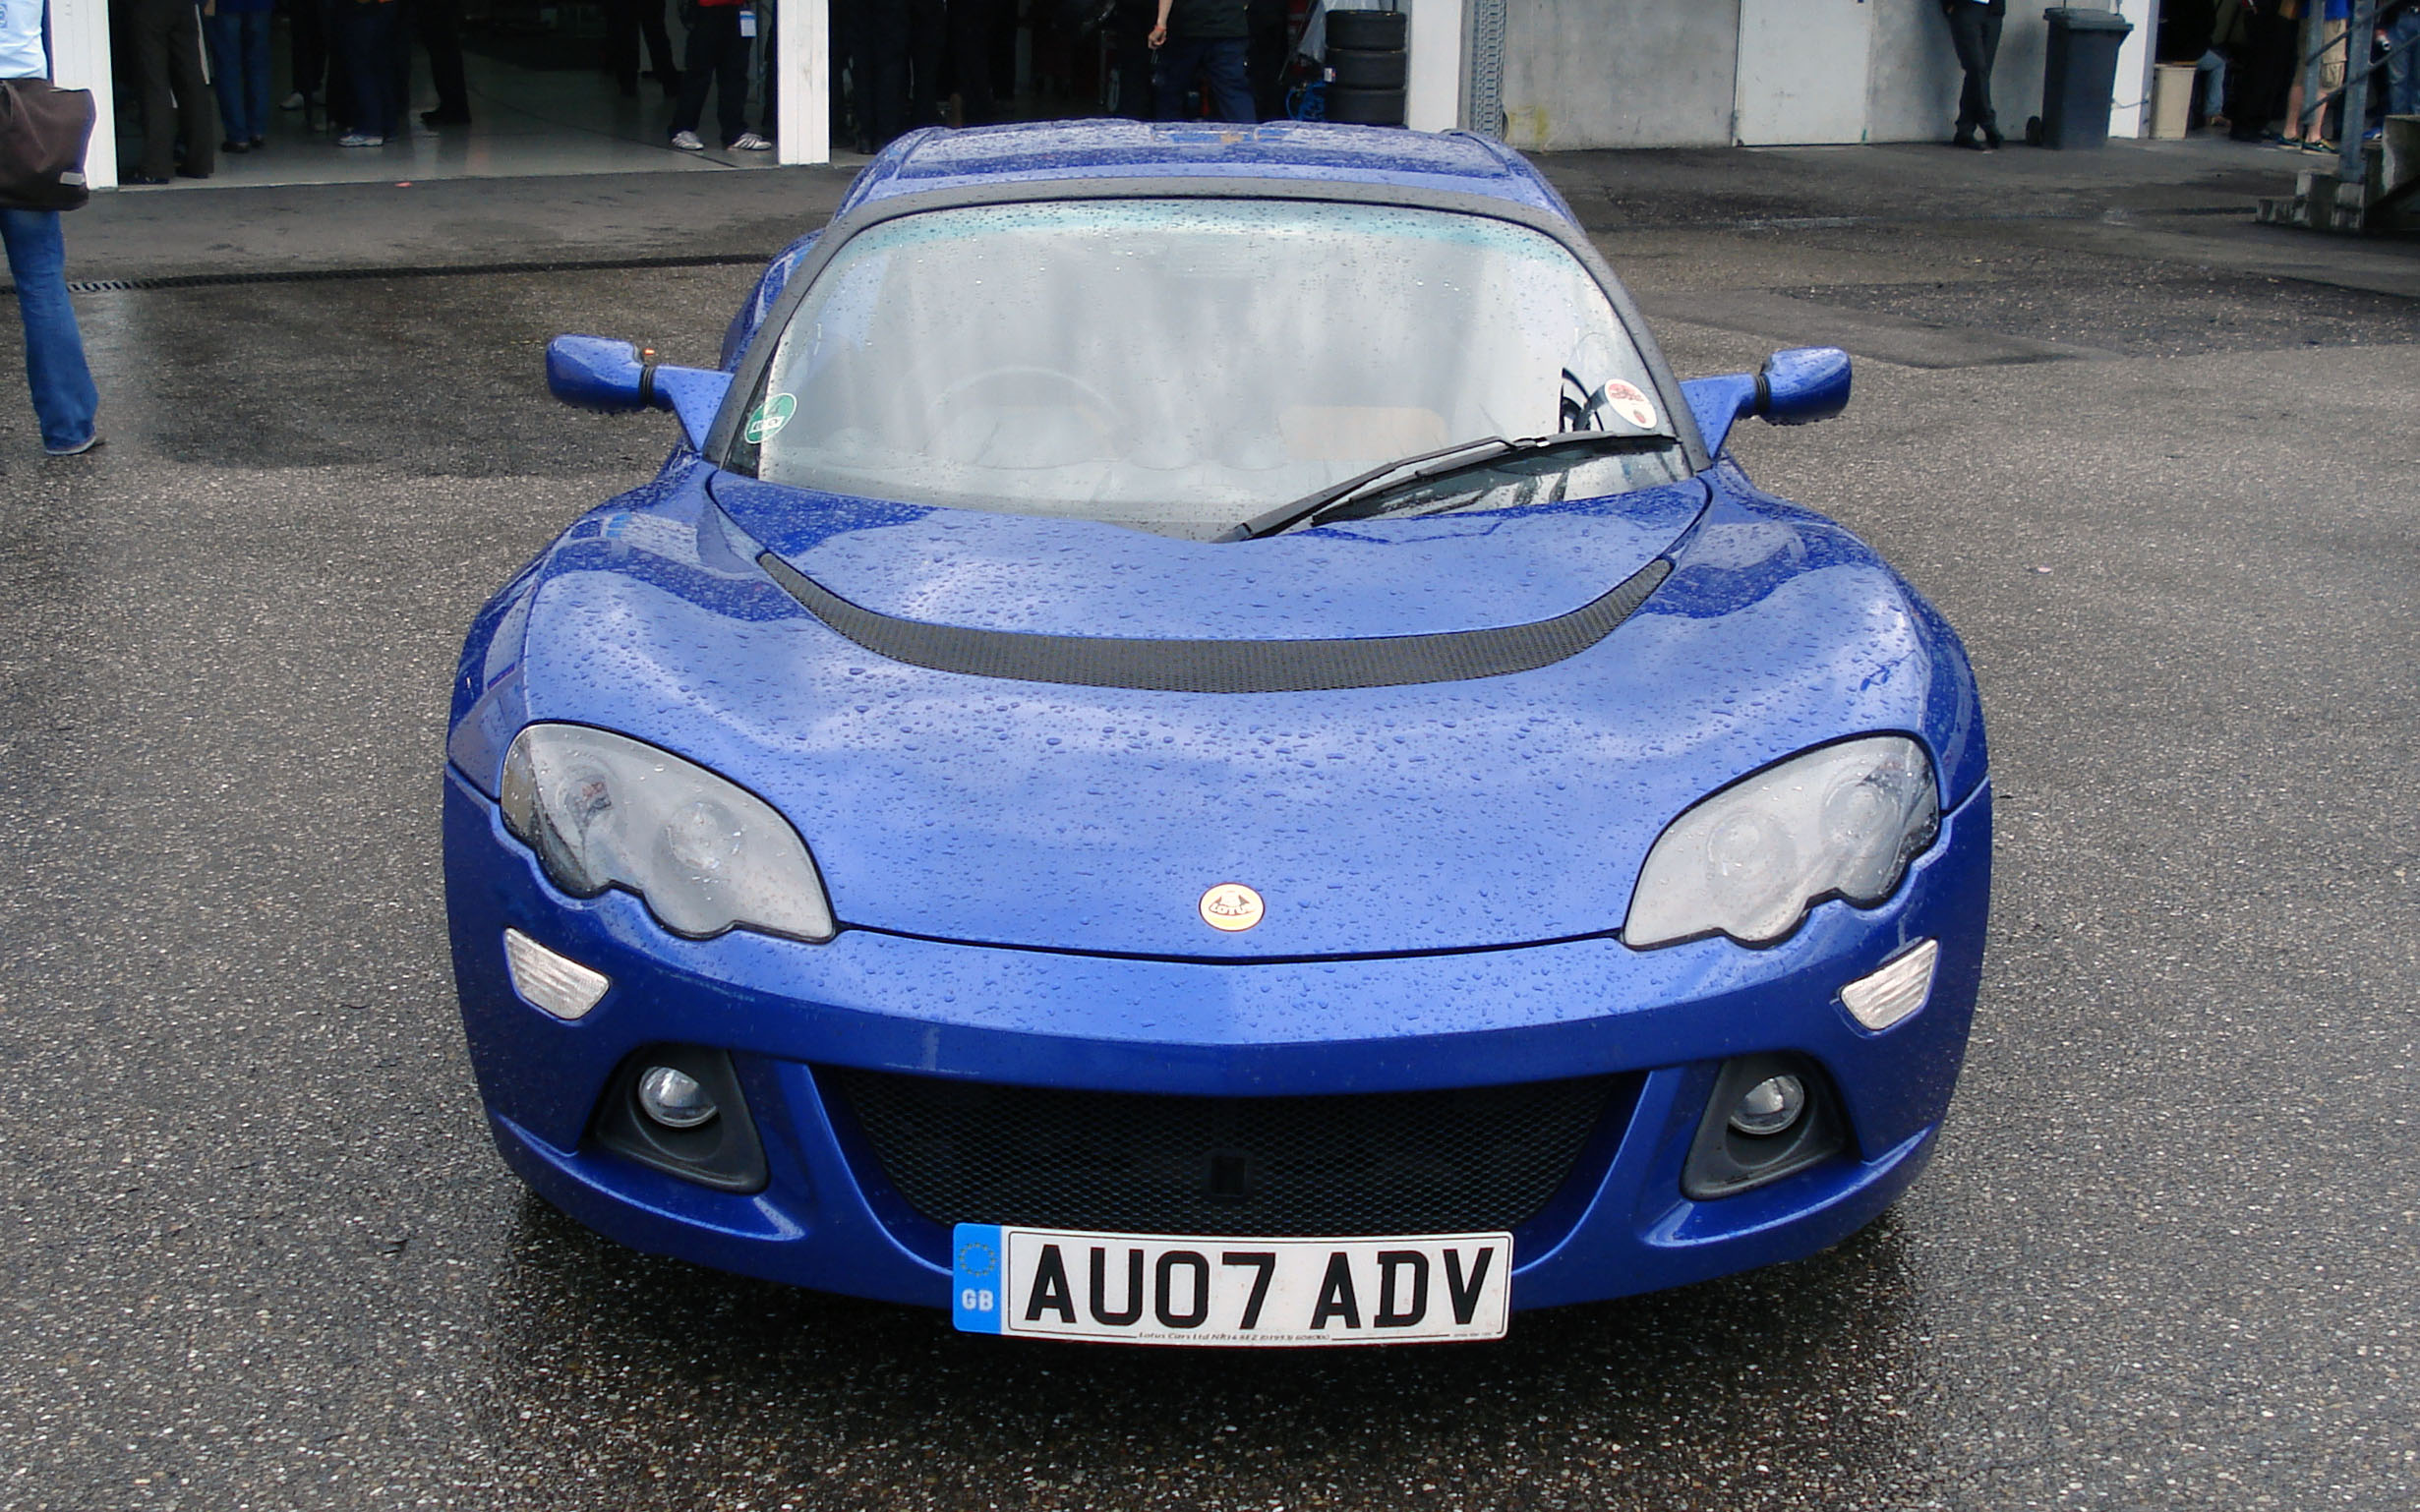 File:Blue Lotus Europa S front.jpg - Wikimedia Commons